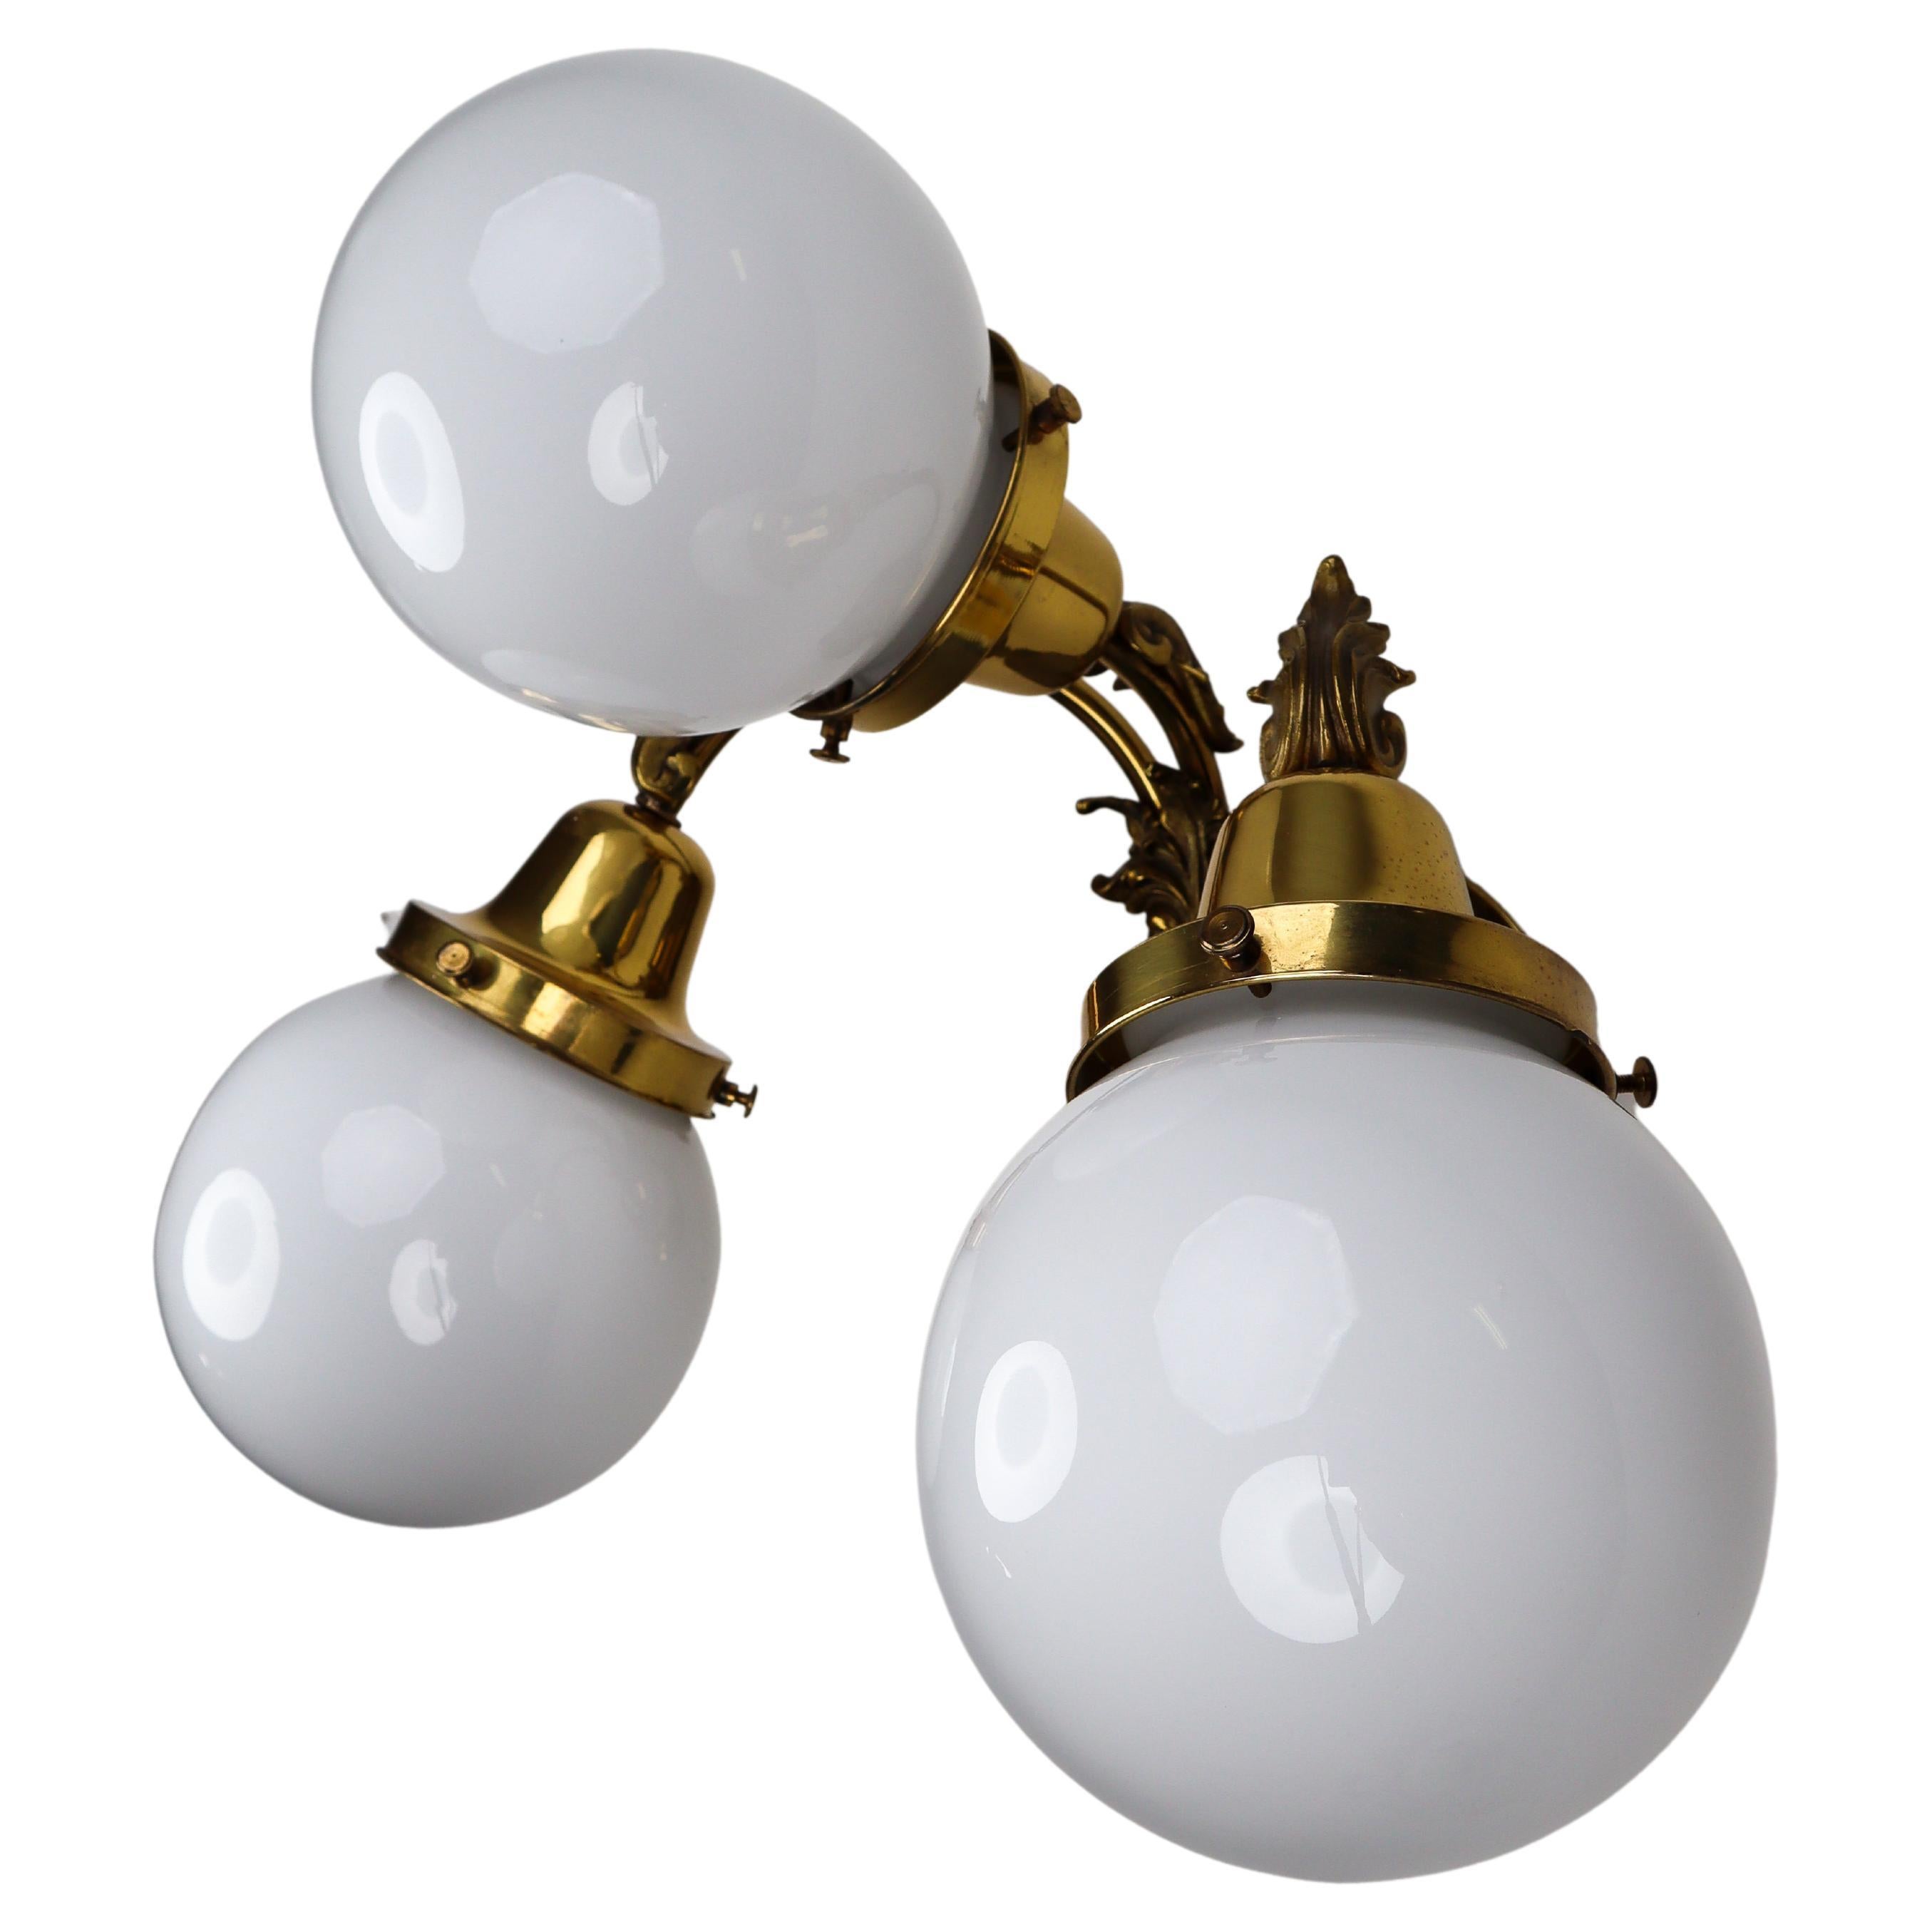 Monumental Brass Wall Lights with Opaline Glass Globes, National Gallery Praque For Sale